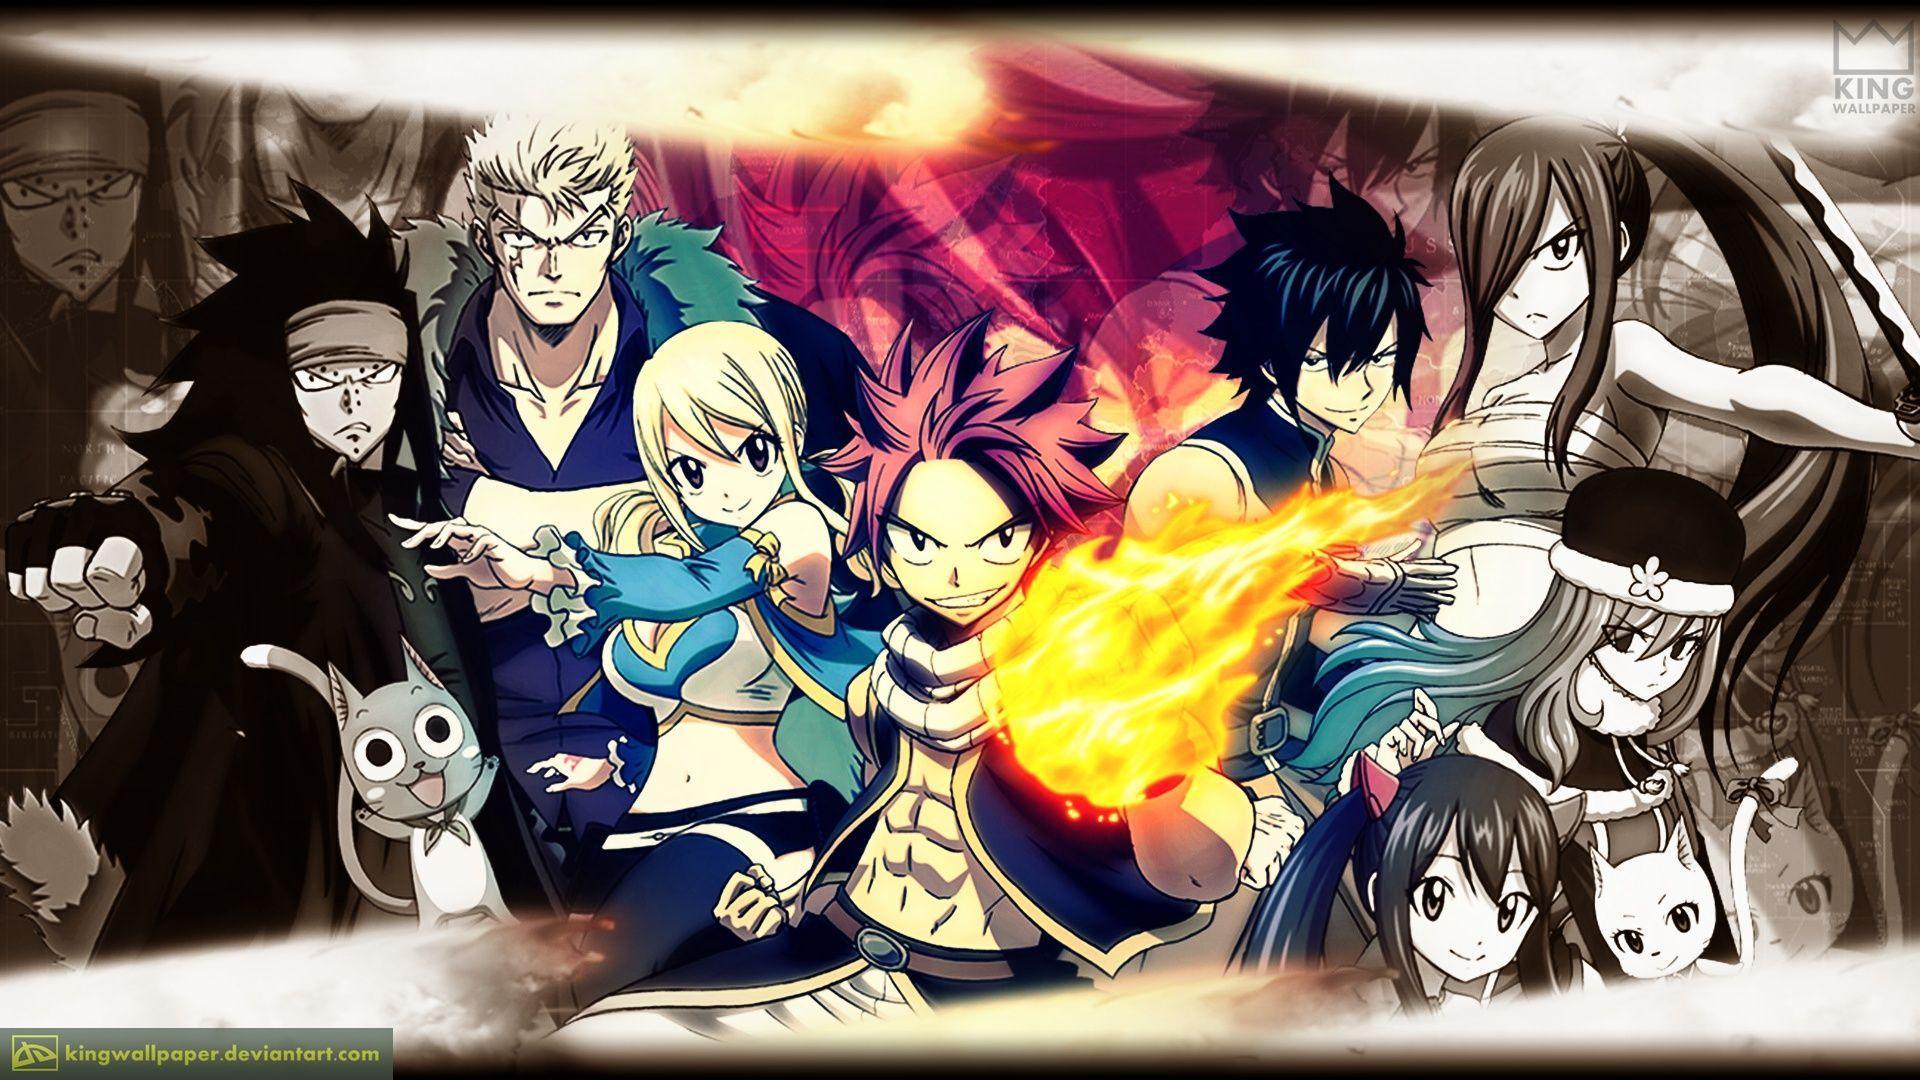 Fairytail 2016 Wallpapers - Wallpaper Cave